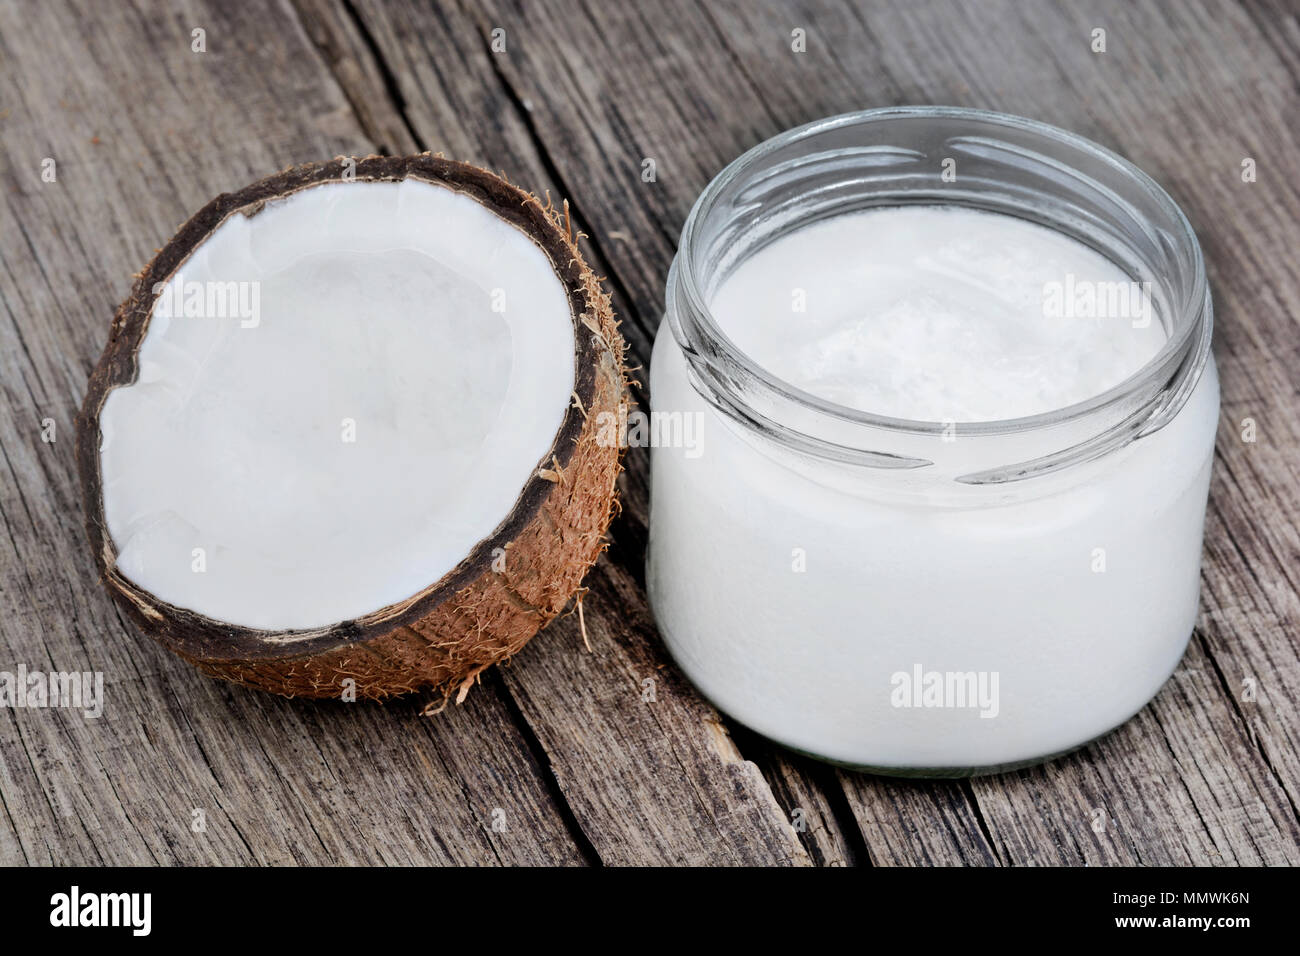 Coconut oil in glassware on wooden table Stock Photo